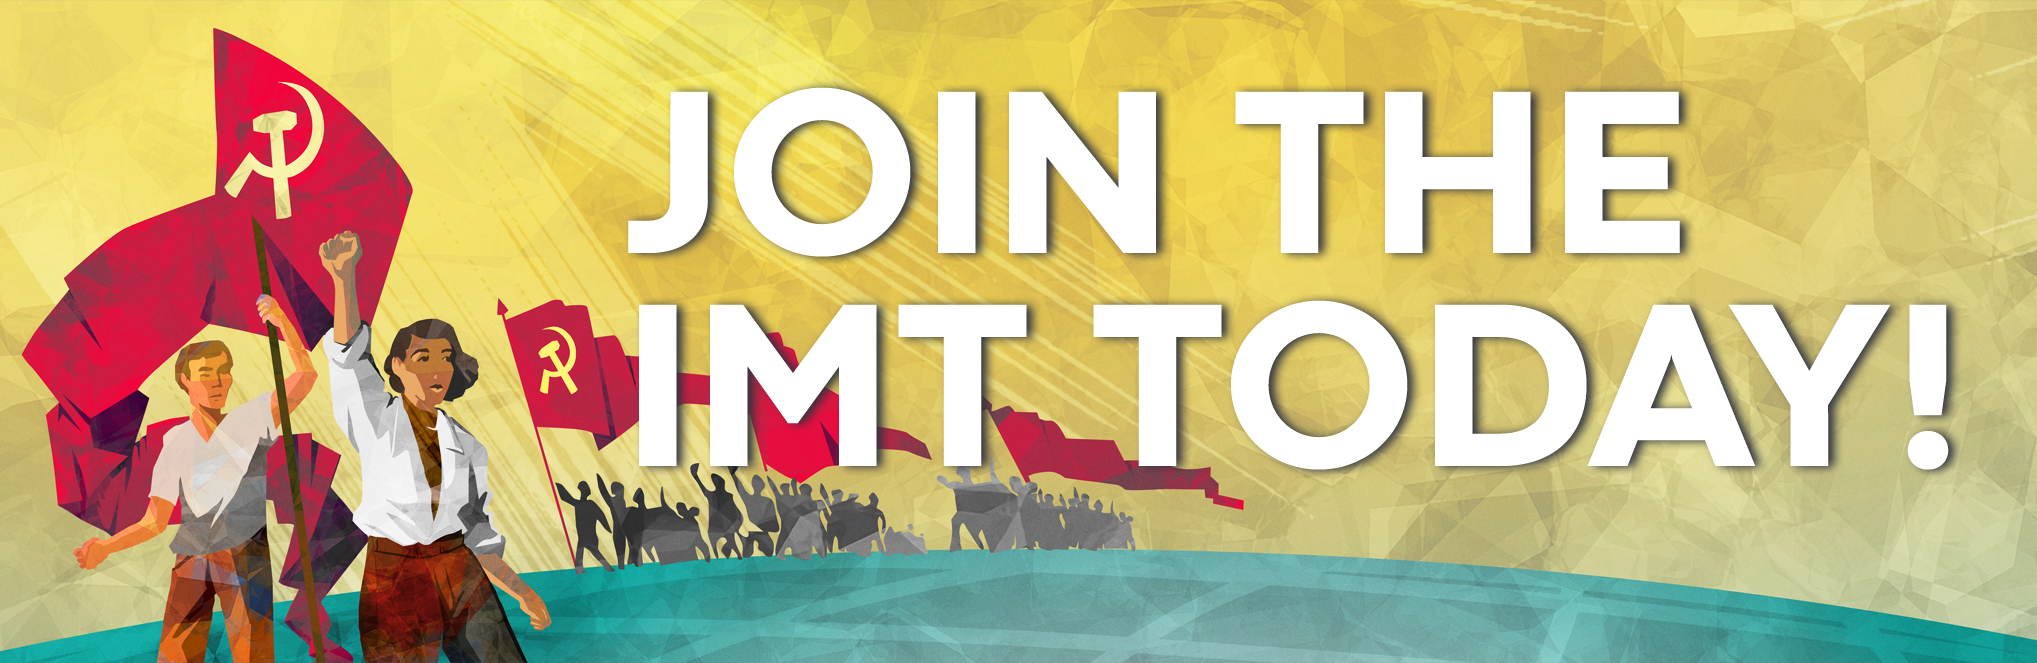 join the imt